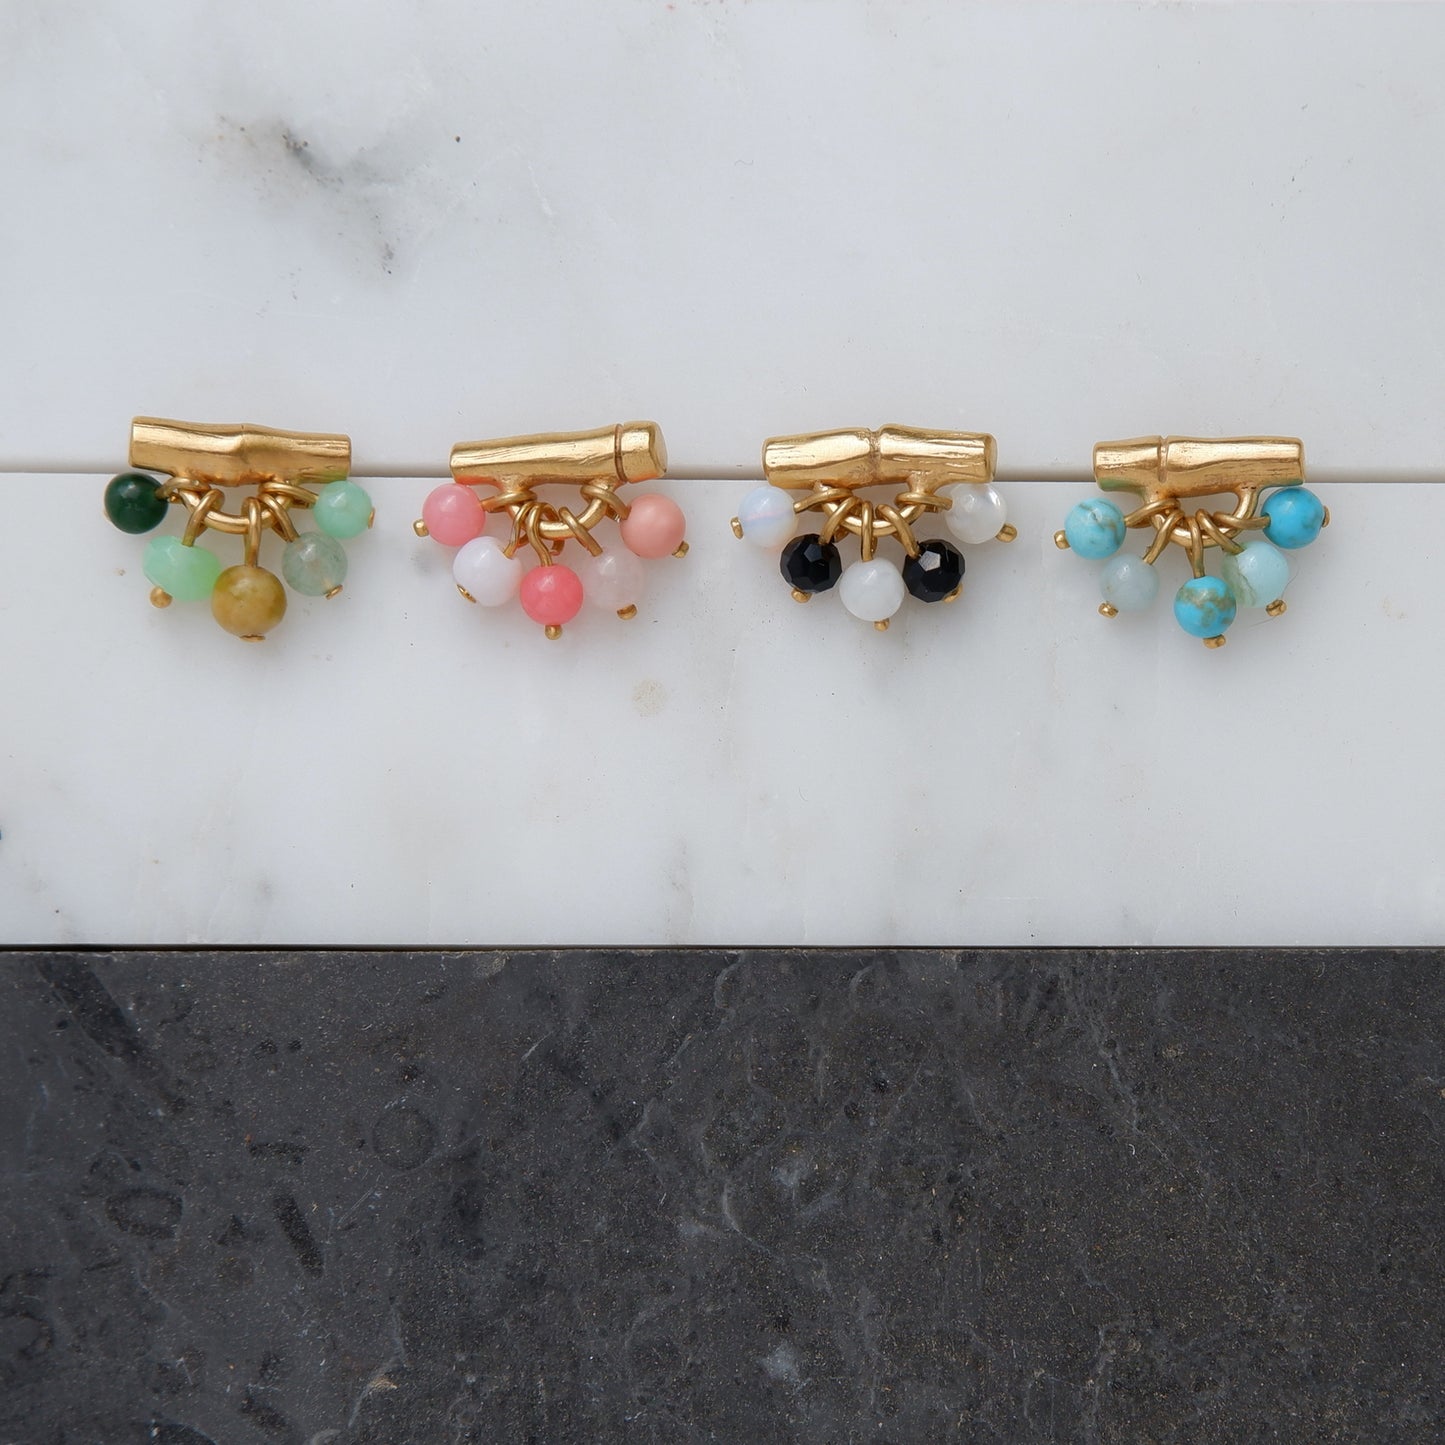 gold vermeil bamboo bar stud earrings with gemstone beads in green, pink, black & white, and green. Still life photograph on marble.